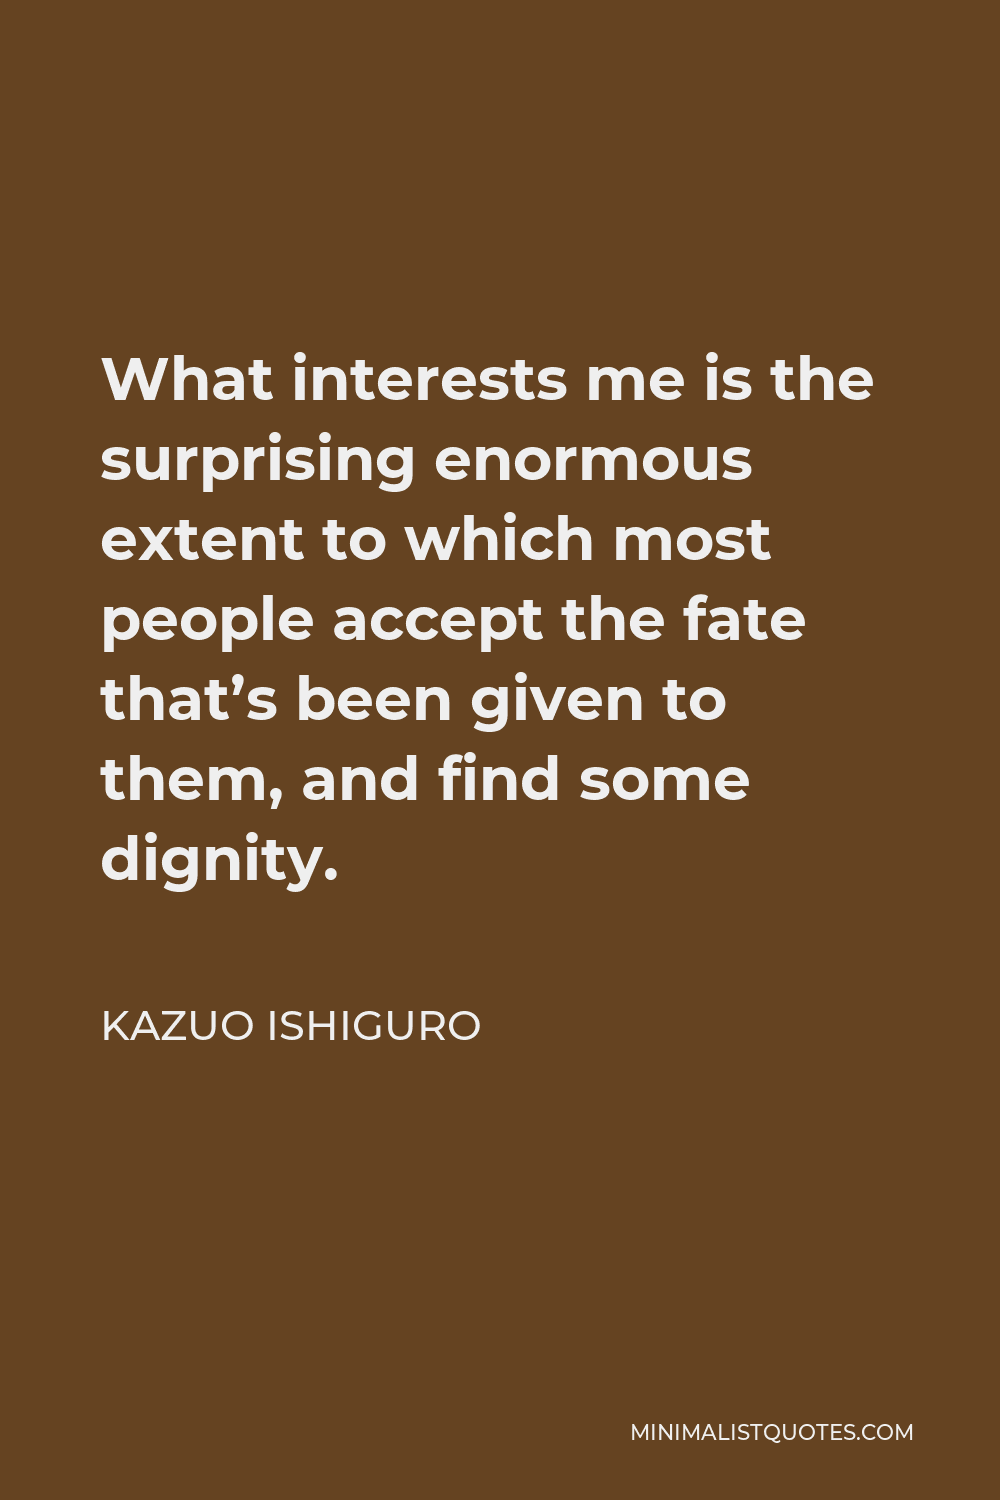 Kazuo Ishiguro Quote - What interests me is the surprising enormous extent to which most people accept the fate that’s been given to them, and find some dignity.